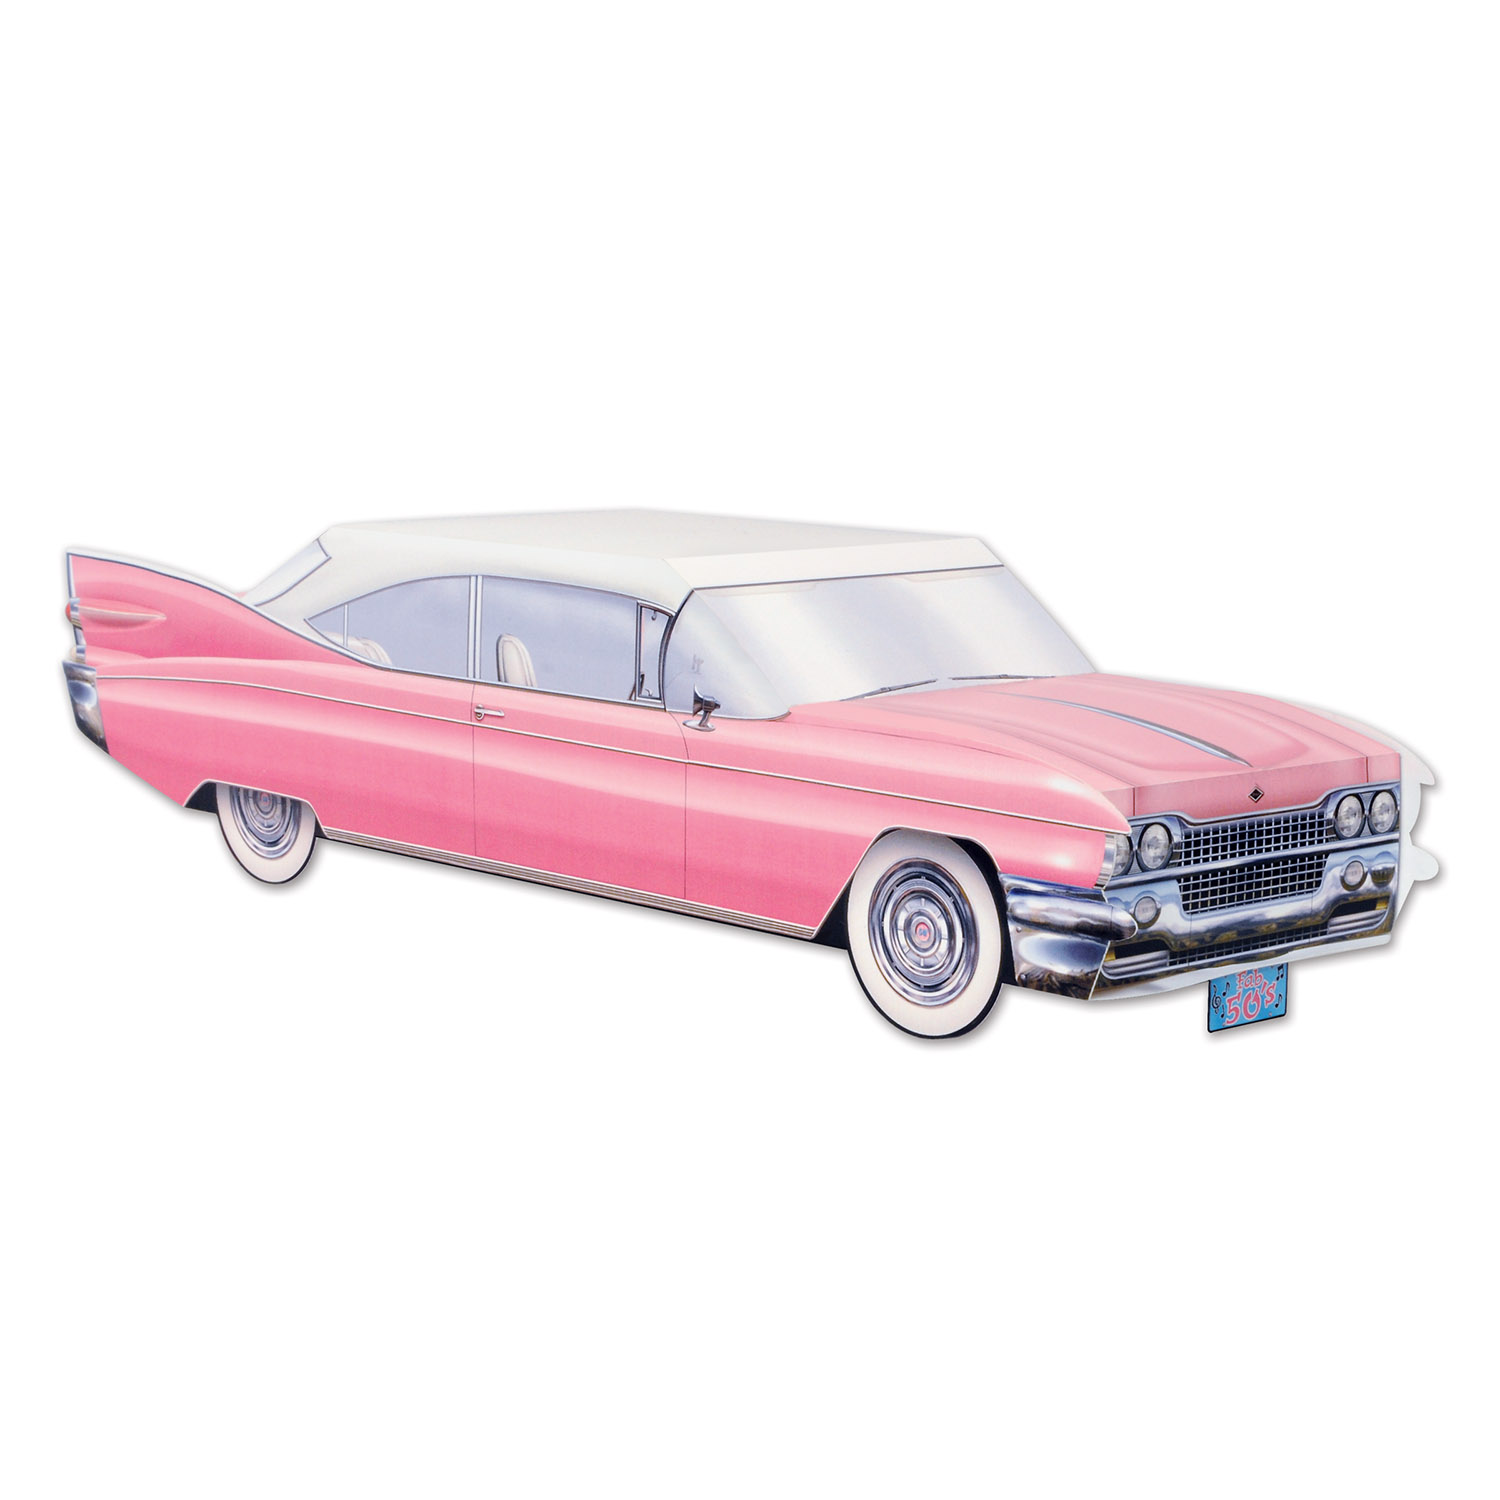 12 Wholesale 3-D 50's Cruisin' Car Centerpiece Assembly Required